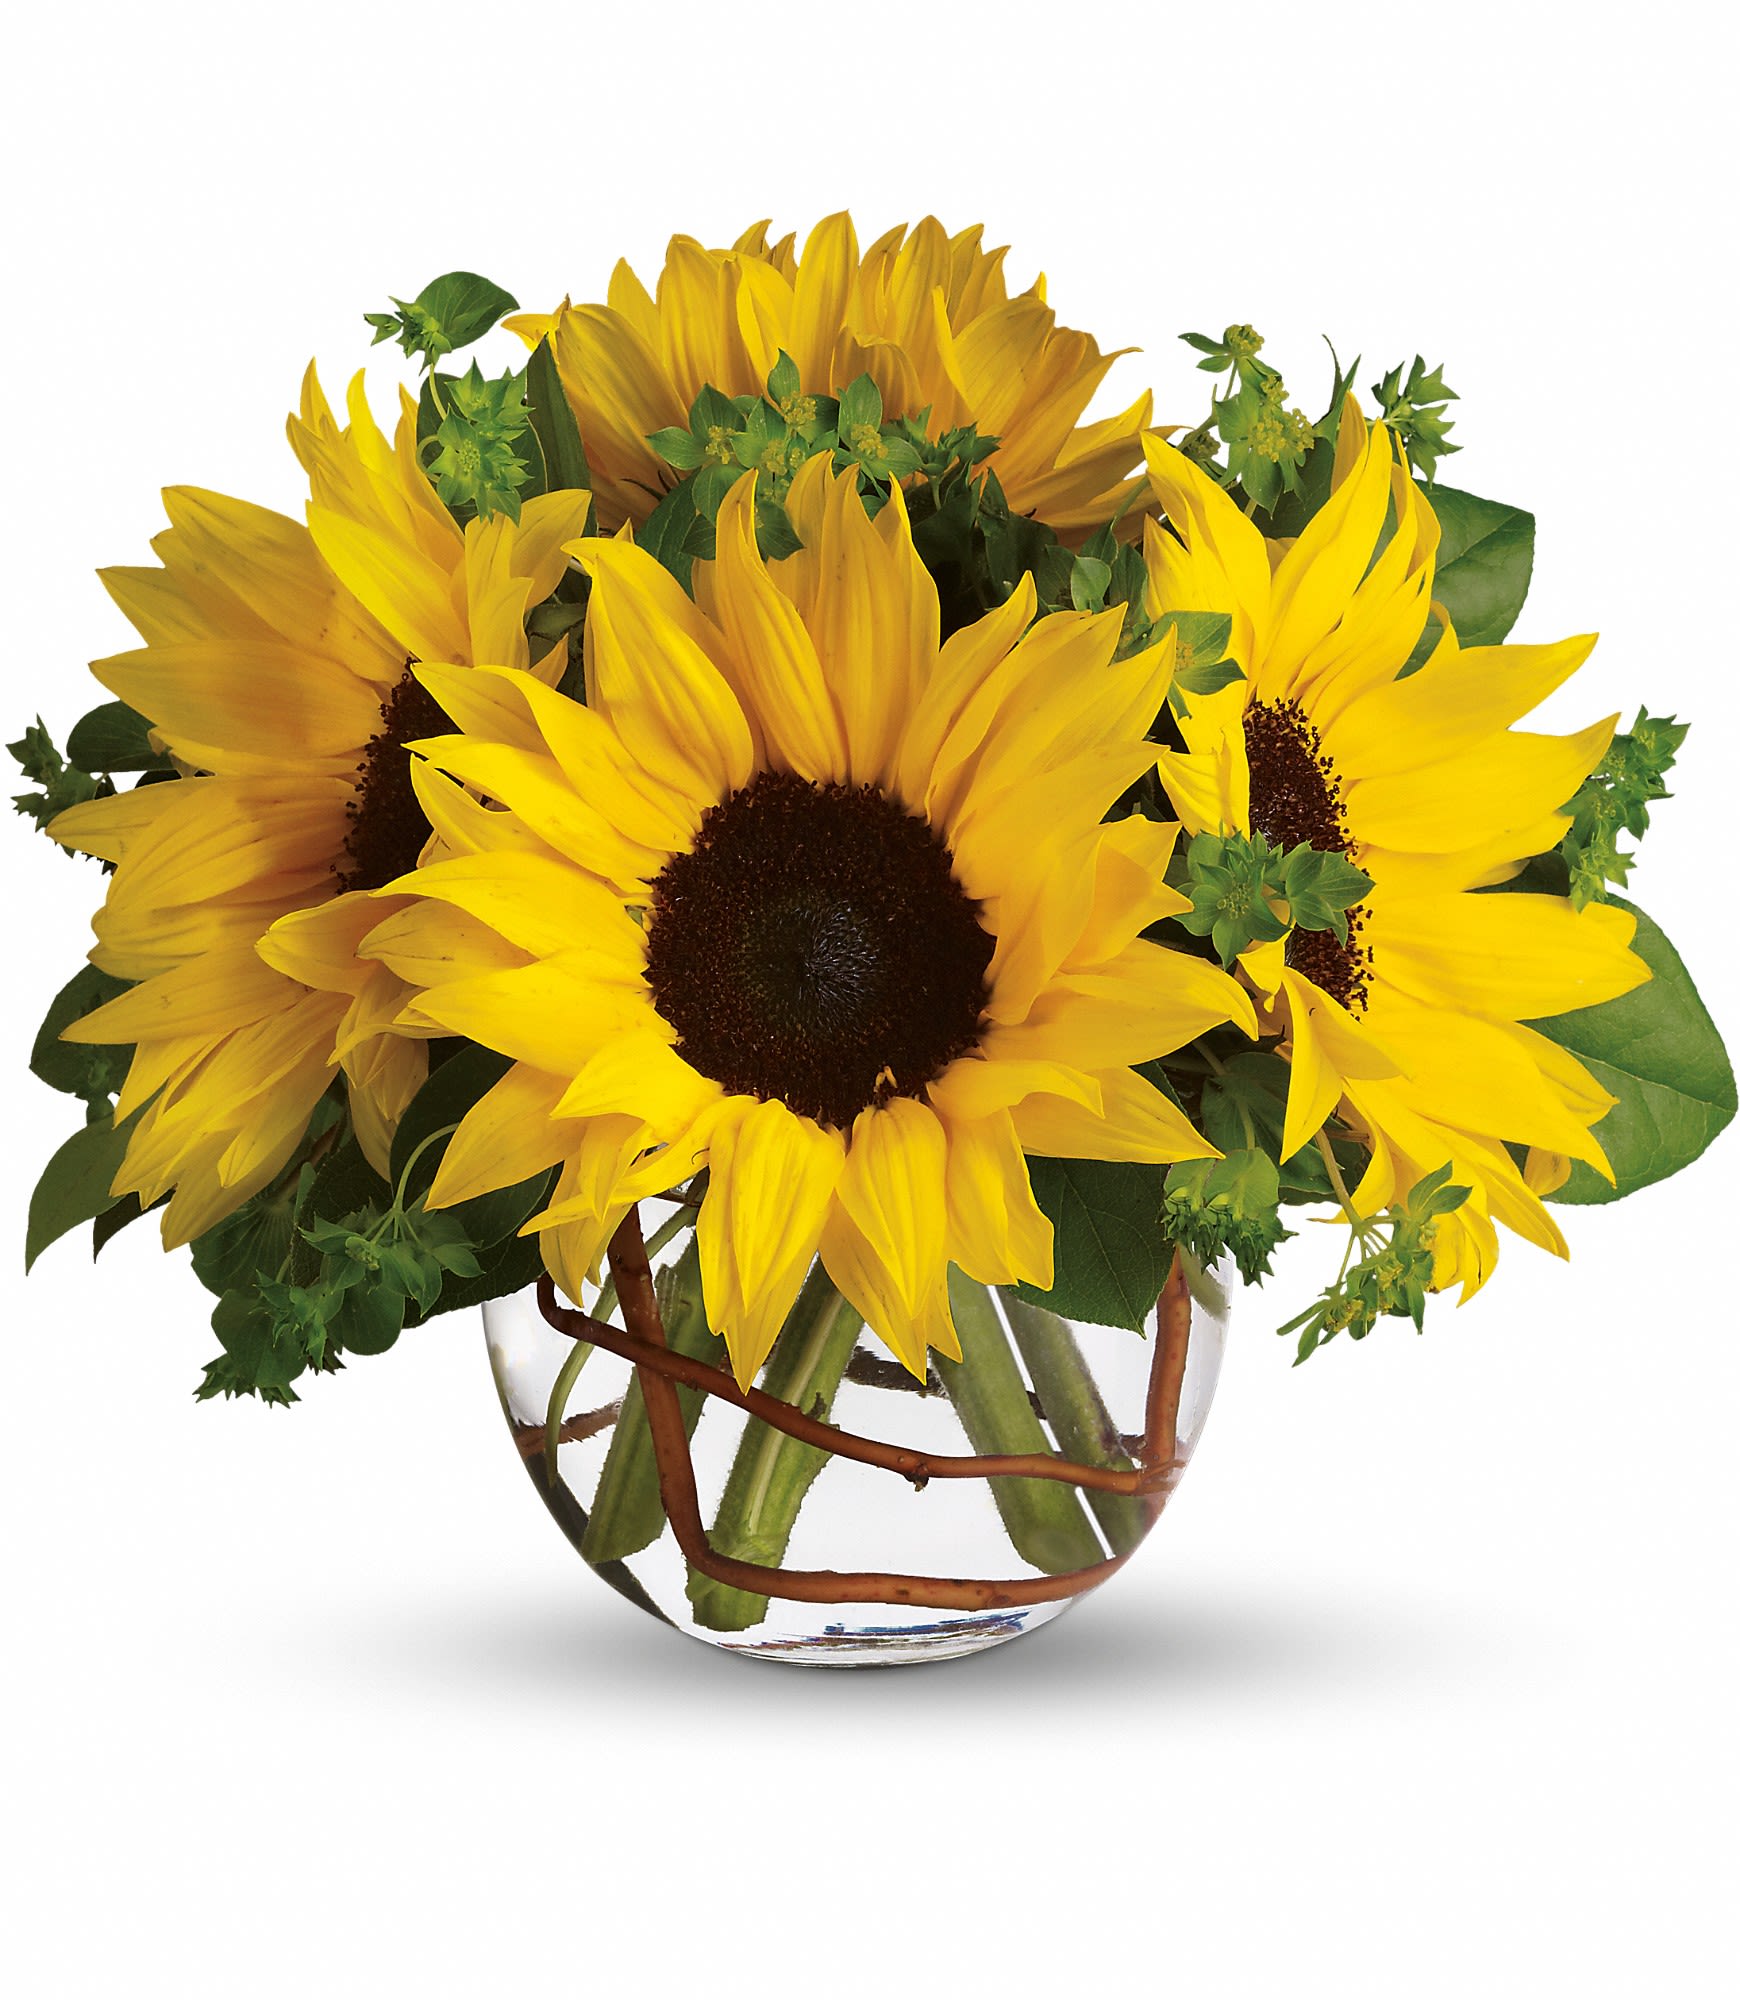 Sunny Sunflowers - Whoever receives this stunning bouquet is sure to be bowled over by its bold beauty! It's big on fun and big on flowers.    Sunflowers steal the show in this simple arrangement. Also featured: green bupleurum, salal leaves and a curly willow inside the glass bubble bowl.    Approximately 12&quot; W x 10&quot; H    Orientation: All-Around    As Shown : T152-2A  Deluxe : T152-2B  Premium : T152-2C